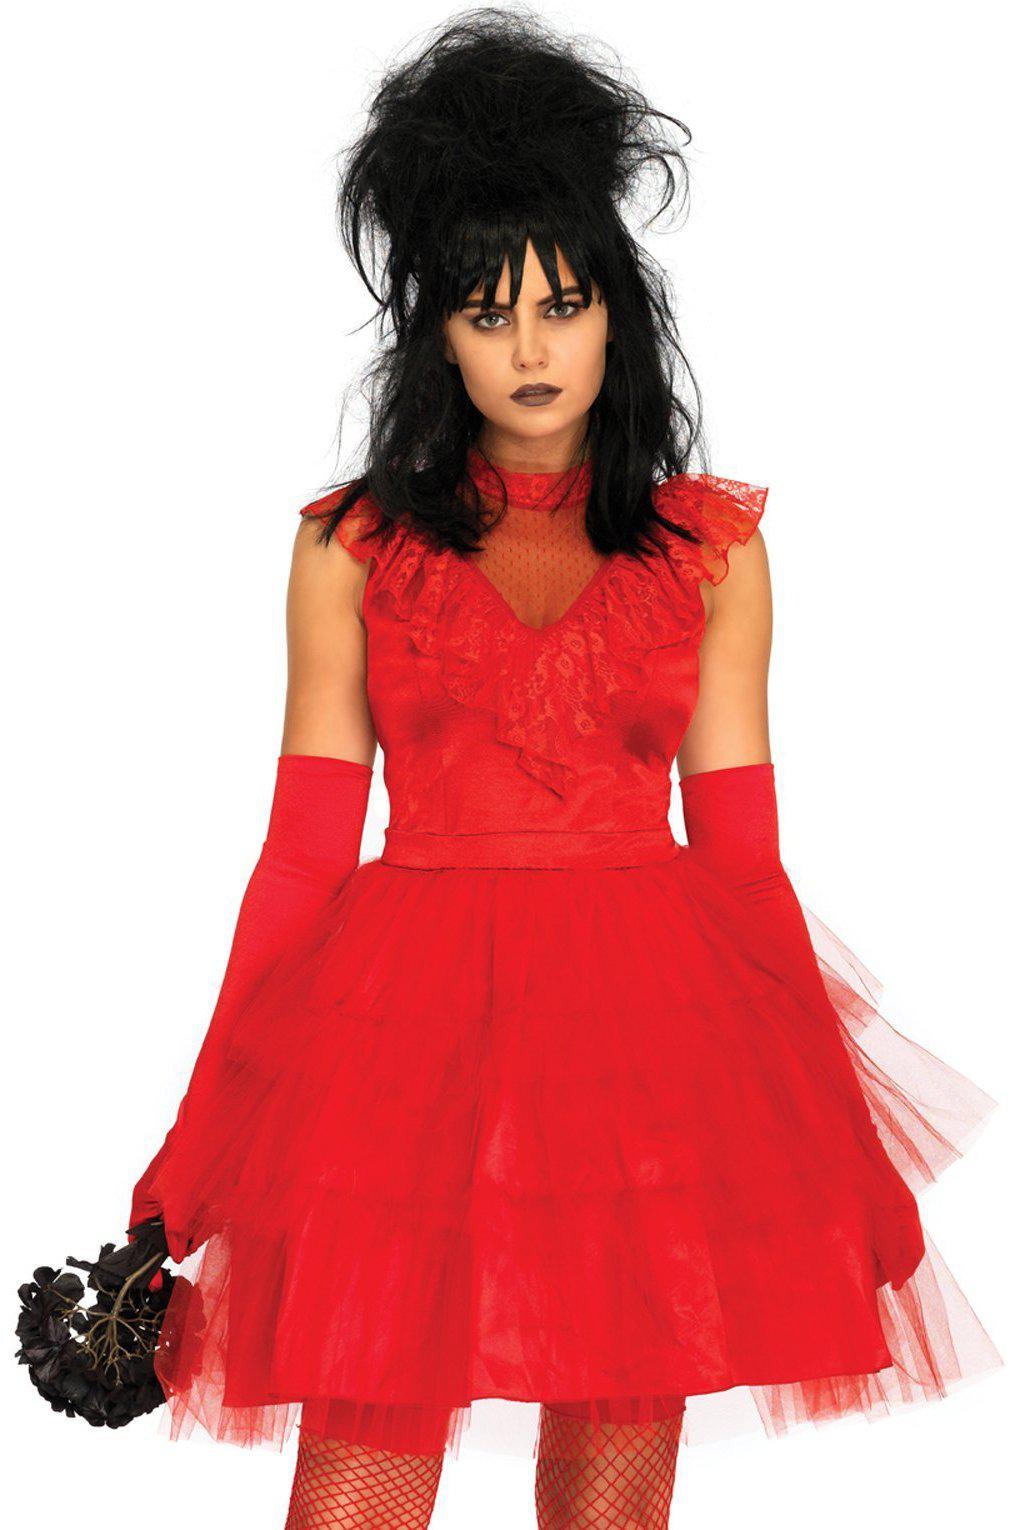 Beetle Bride Costume-Other Costumes-Leg Avenue-Red-S-SEXYSHOES.COM